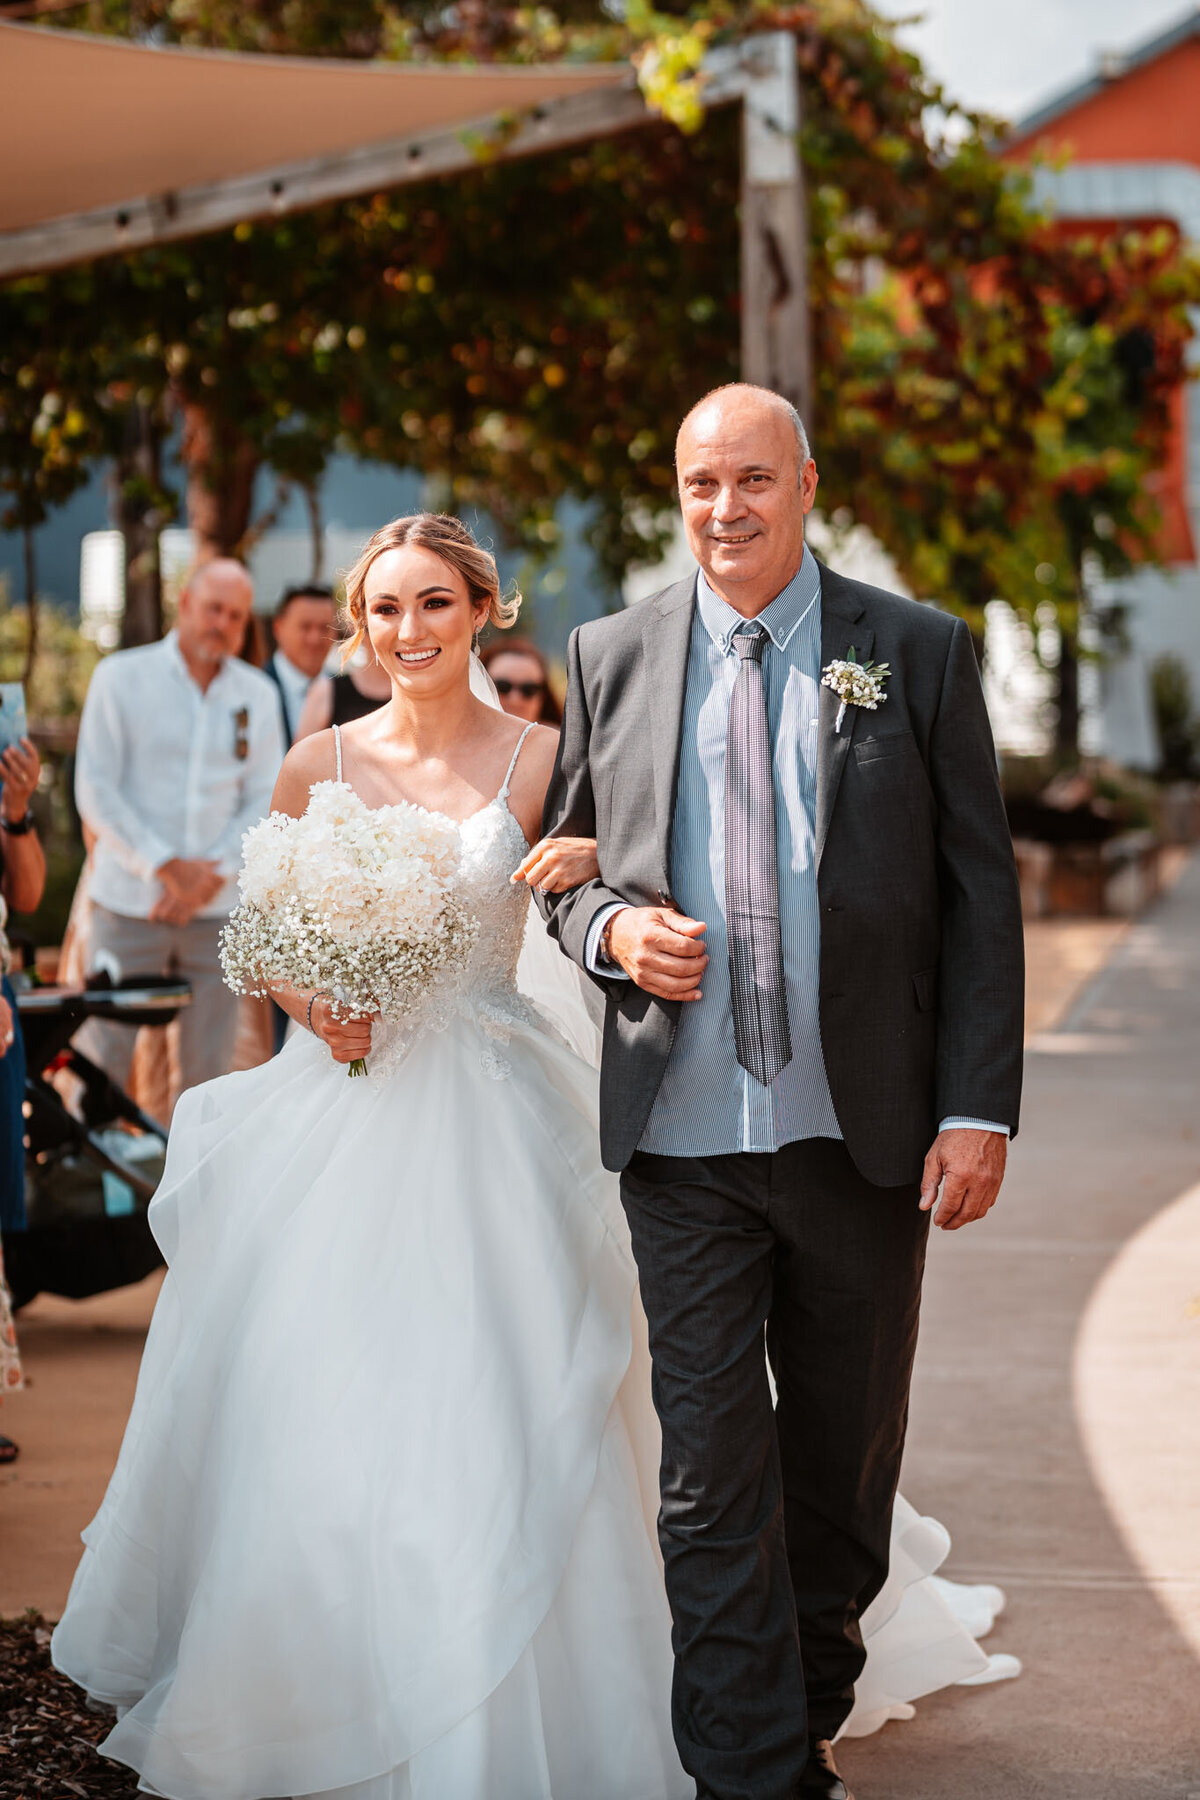 Emily and her Dad had walked with her down the aisle